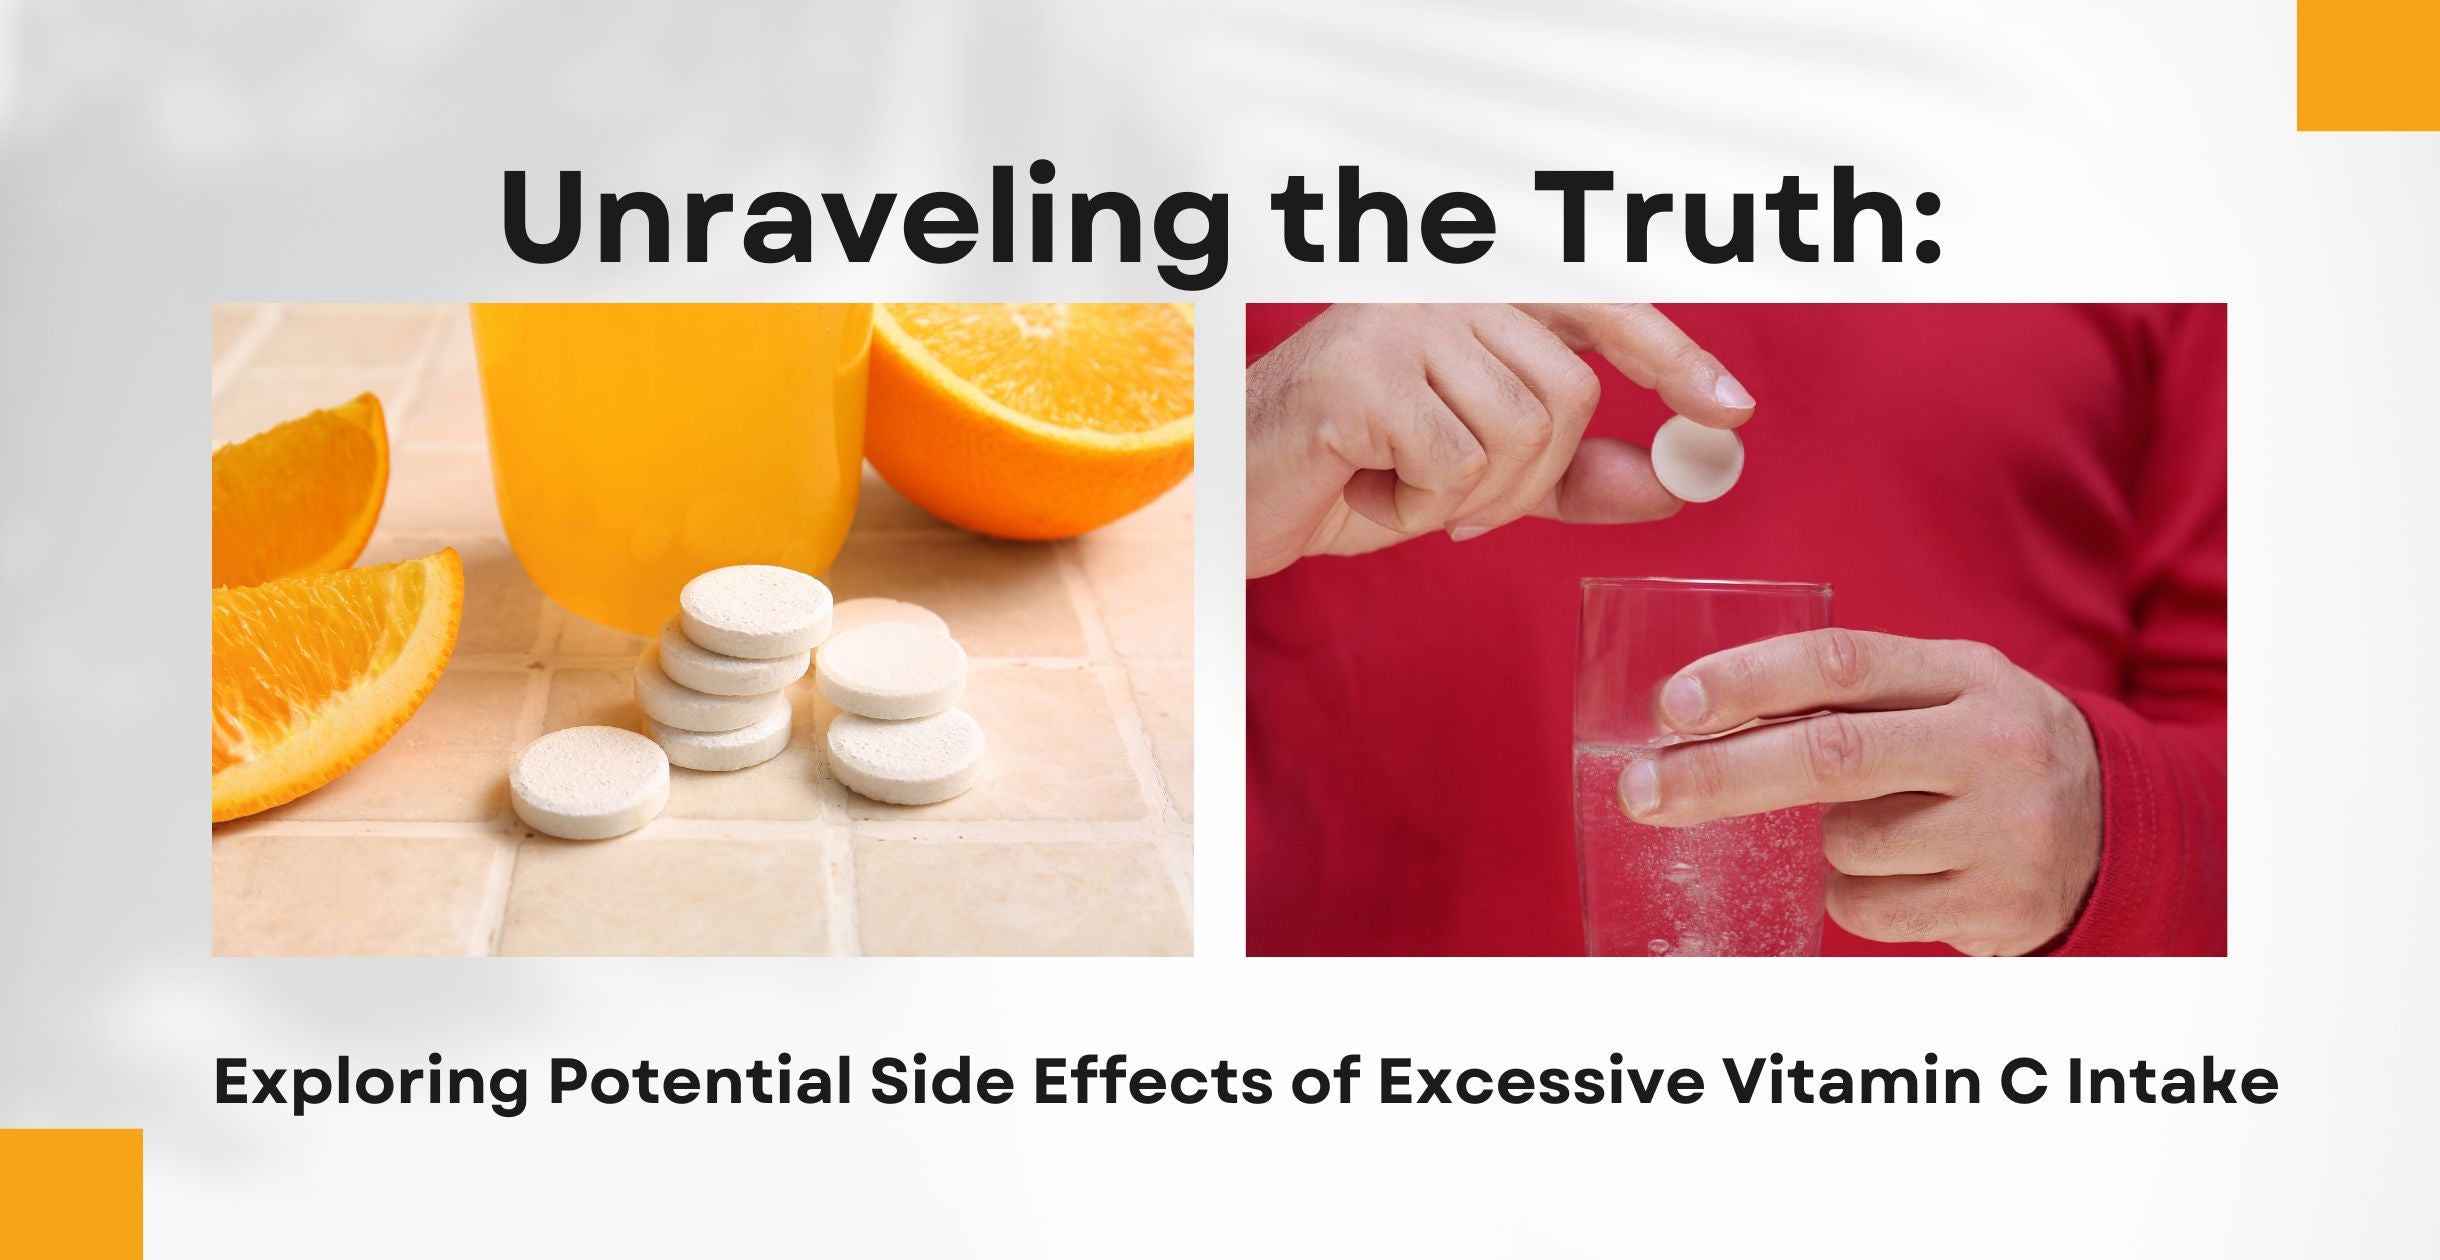 Unraveling the Truth: Exploring Potential Side Effects of Excessive Vitamin C Intake